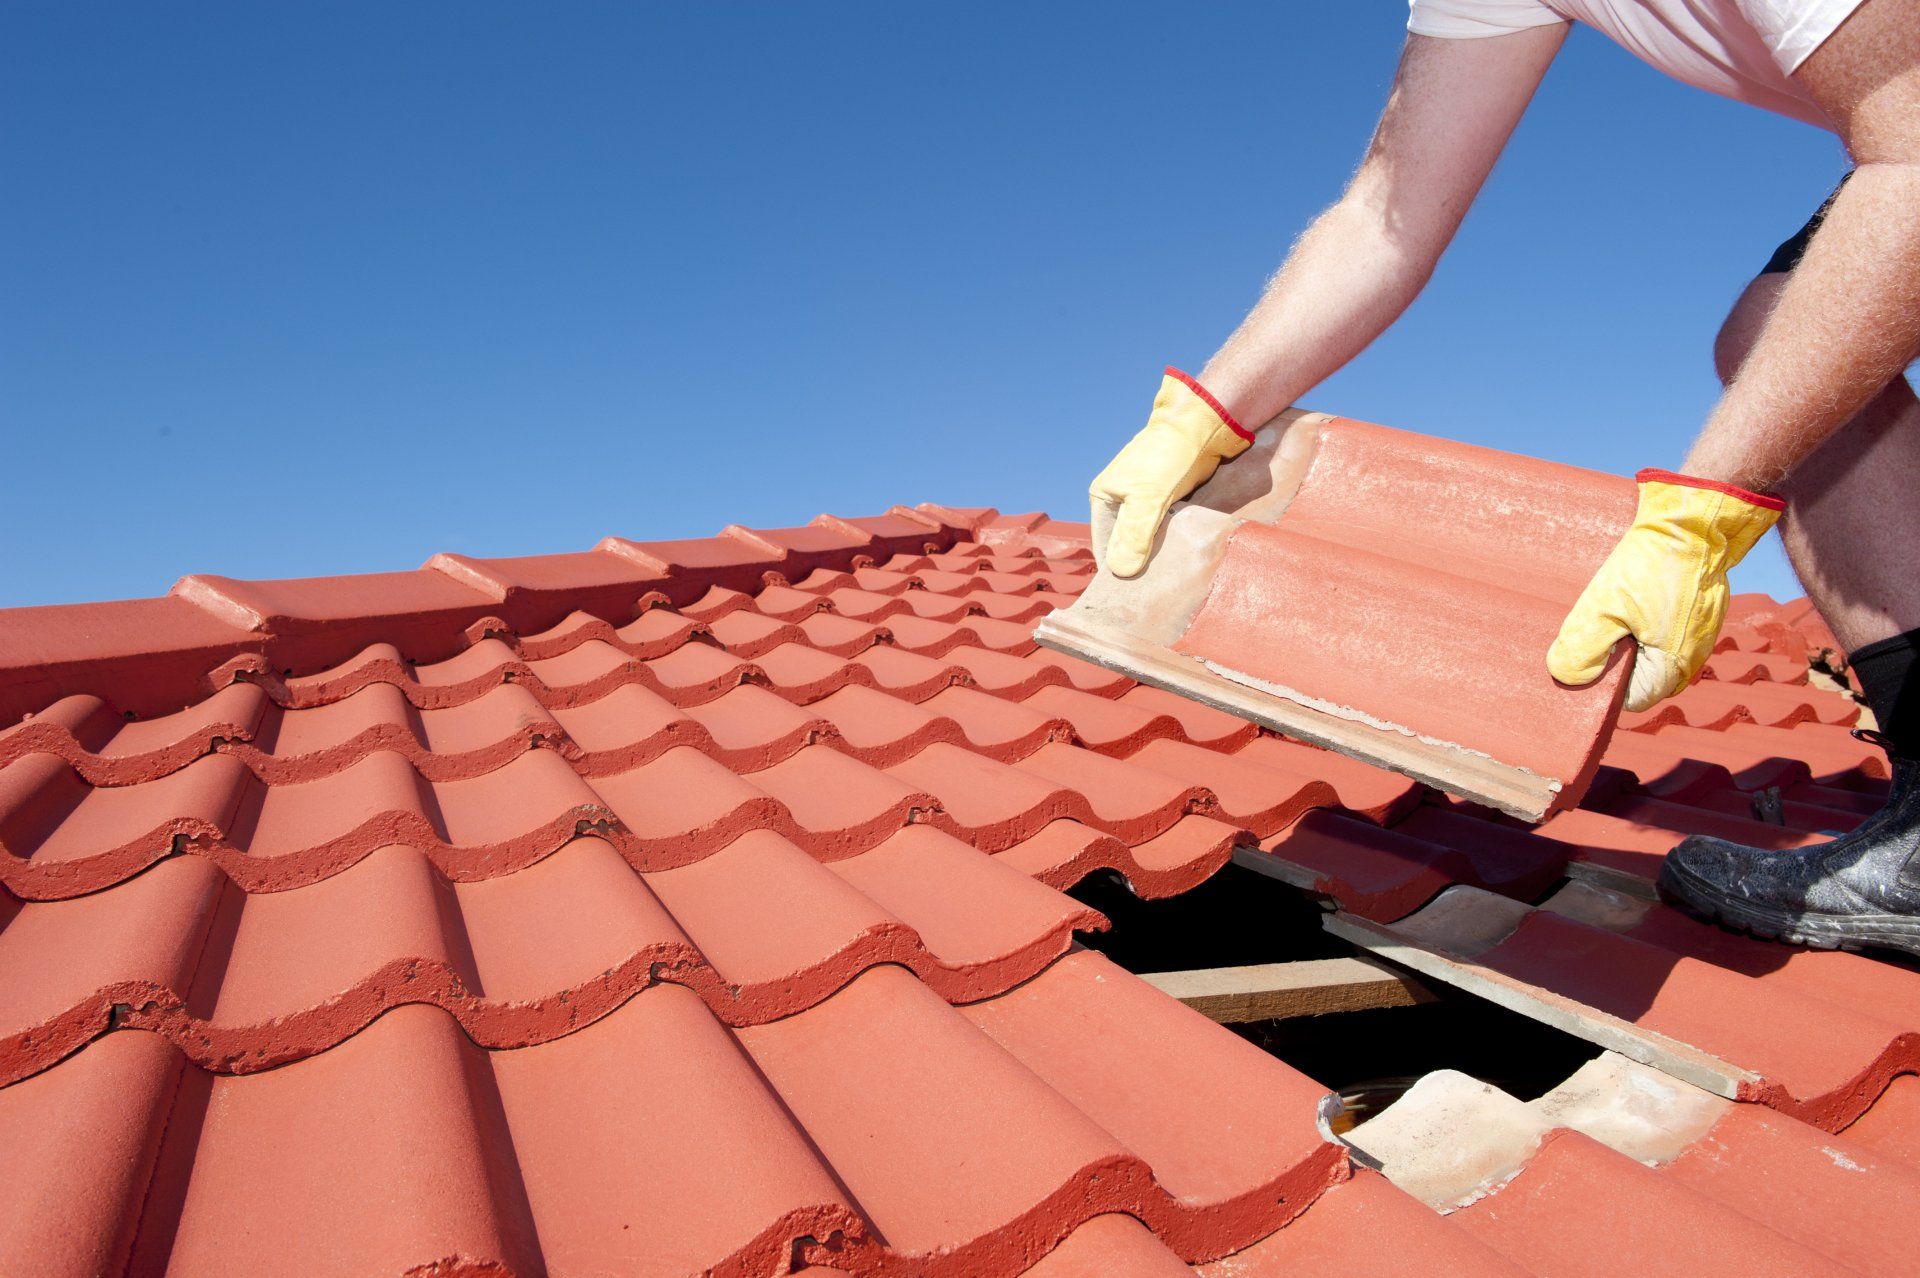 Roof repair, worker with yellow gloves replacing red tiles or shingles on house with blue sky as background and copy space